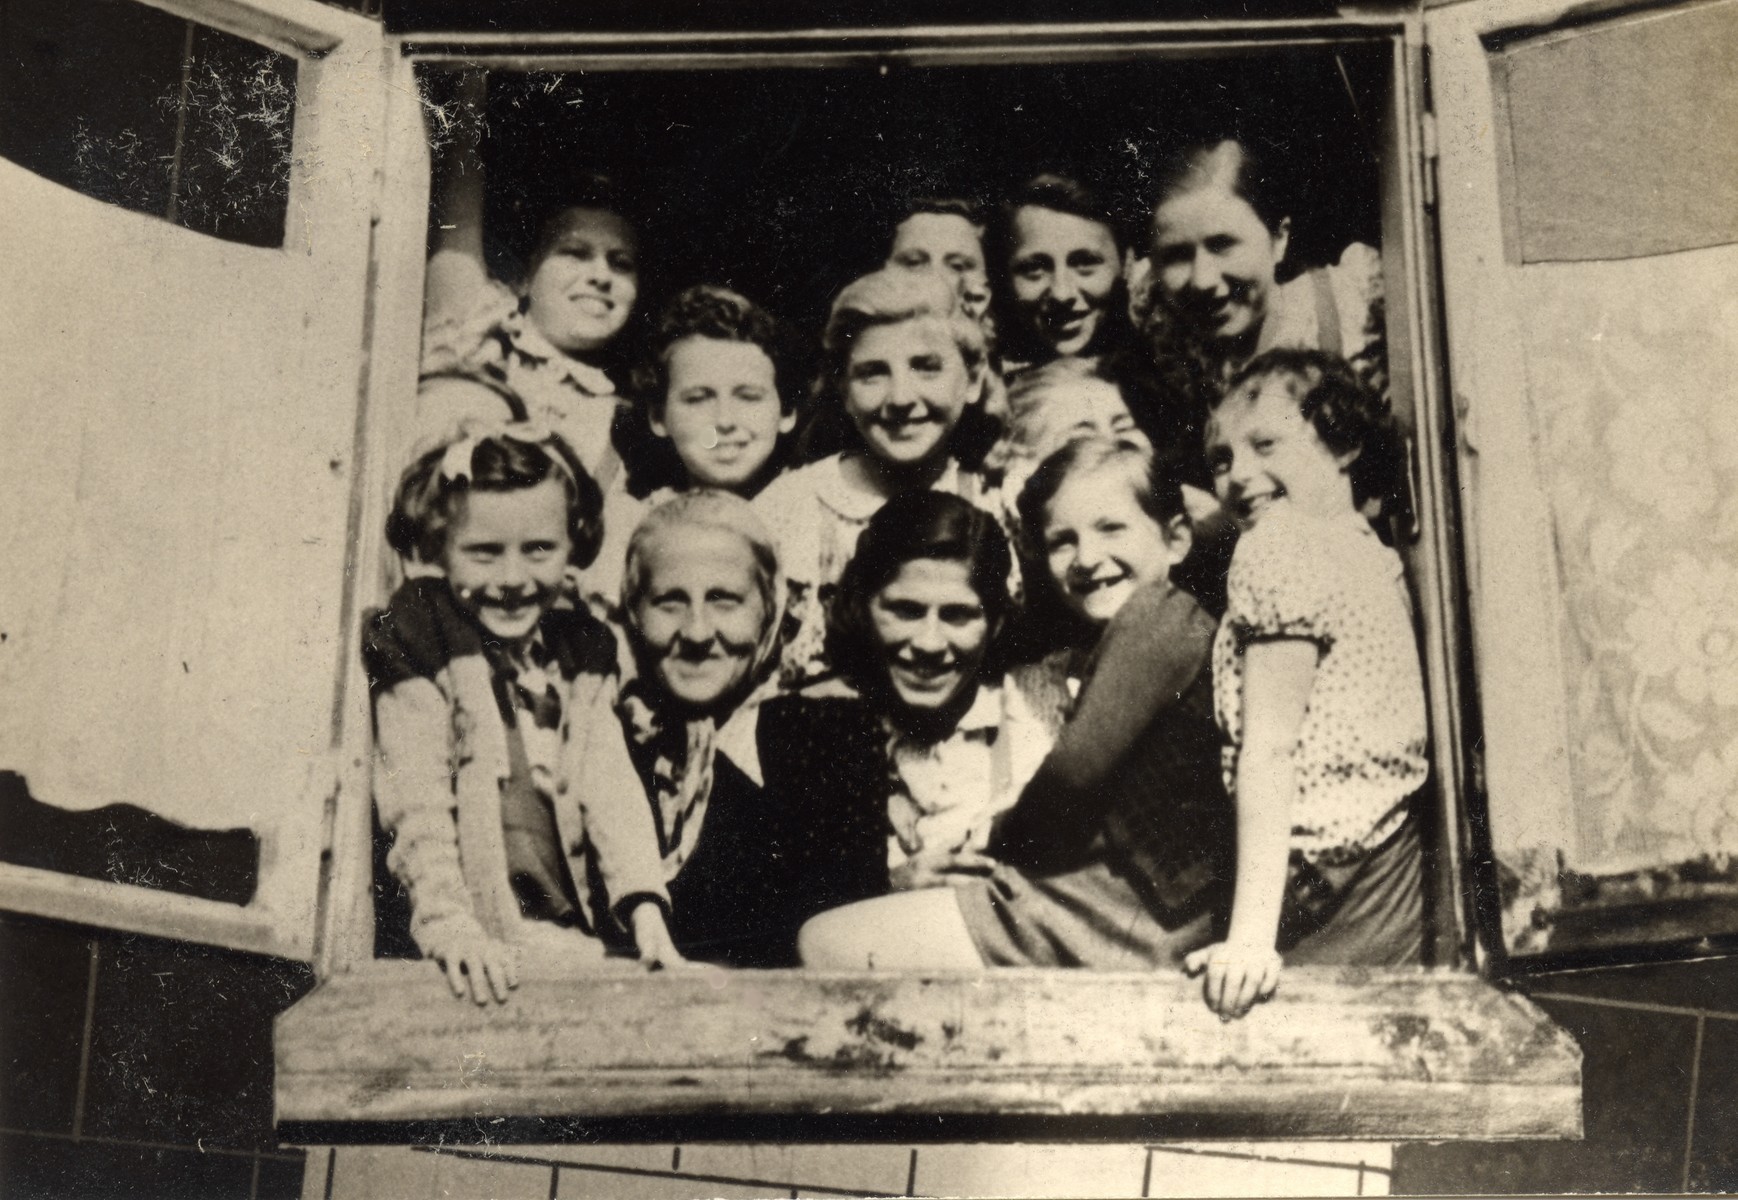 Stella Rein, the headmaster of the Lodz ghetto's high-school, posing with young girls. 

Pictured in the front row, right, is Felicia (Faiga) Ferszter, daughter of Leon (Leib) Ferszter and his first wife Zelda (nee Asz) Ferszter.  Felicia was born in February 1931 in Lodz and died with her mother in Auschwitz in August 1944.